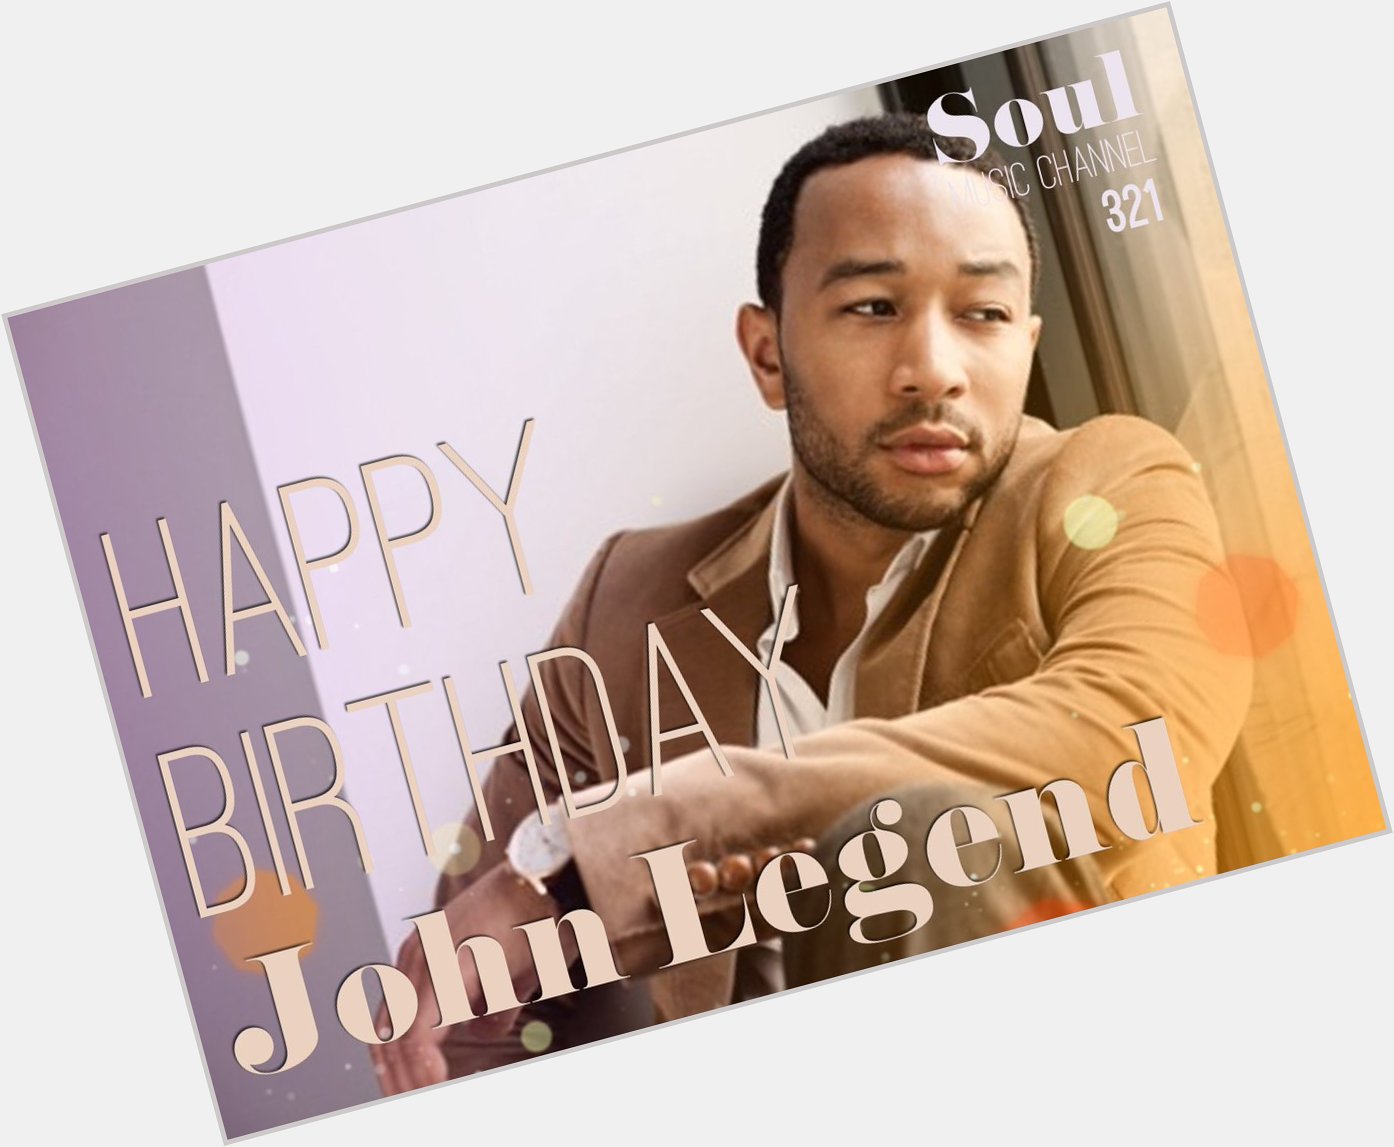 Happy Birthday to singer, songwriter and actor John Roger Stephens, better known as John Legend! 